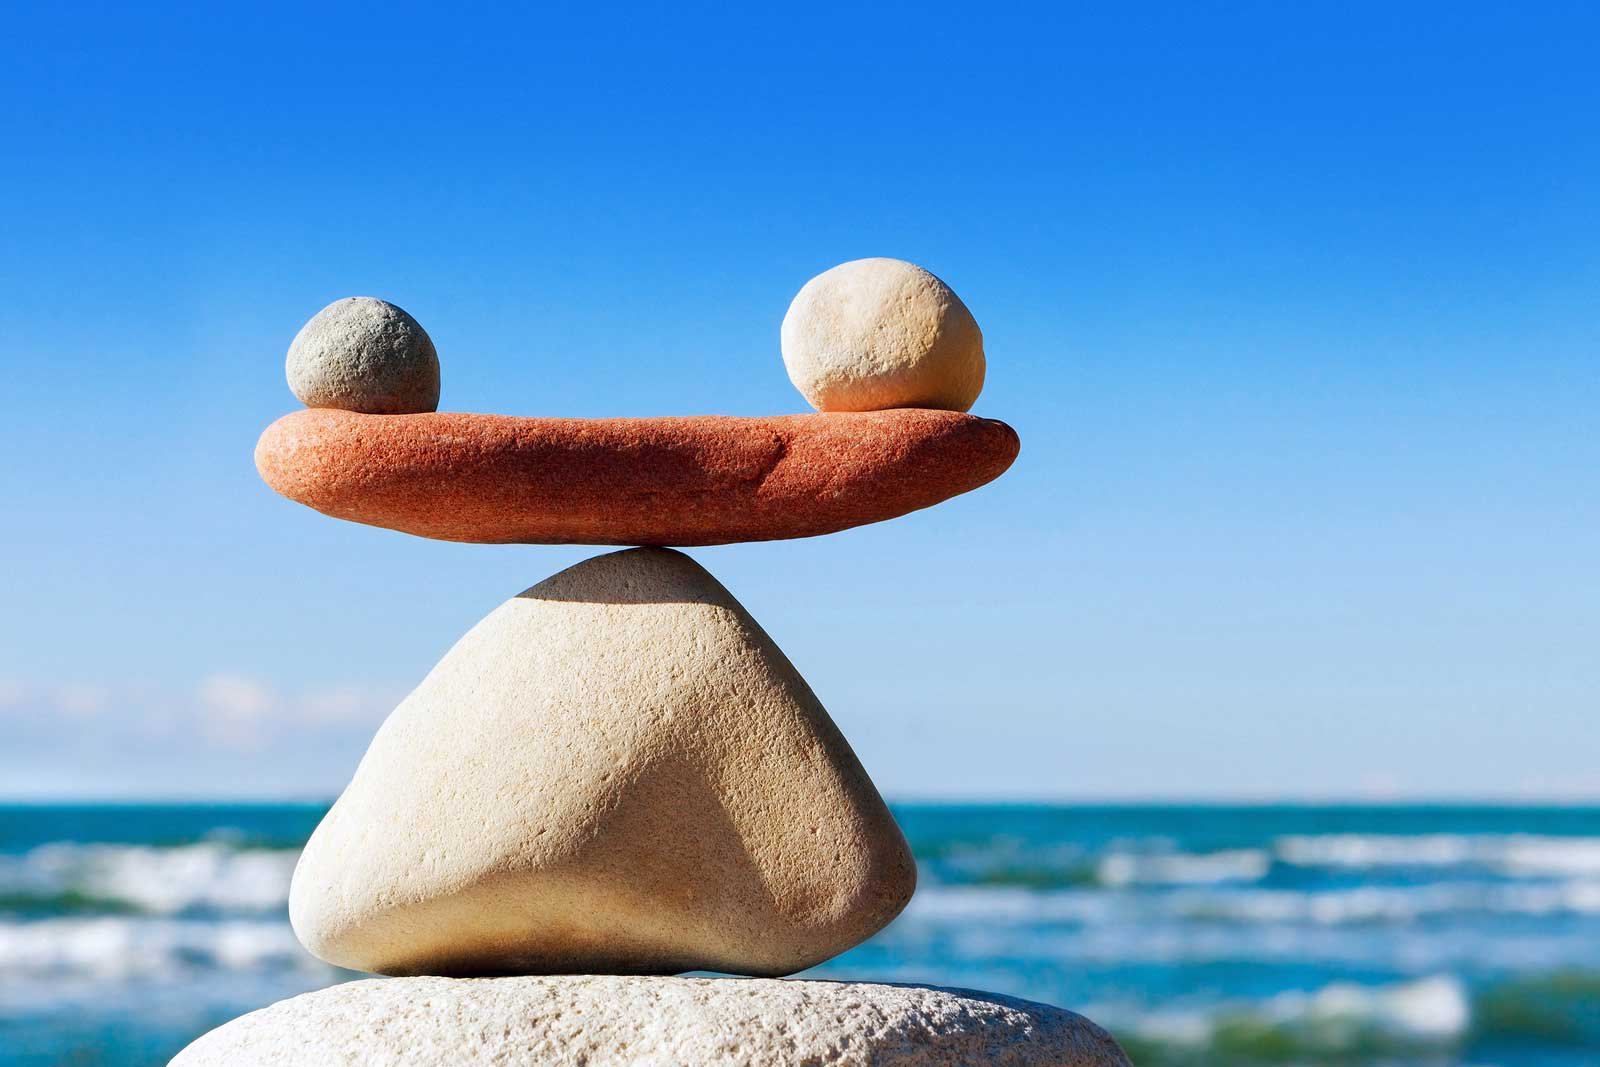 Image of stones balancing in front of the sea.